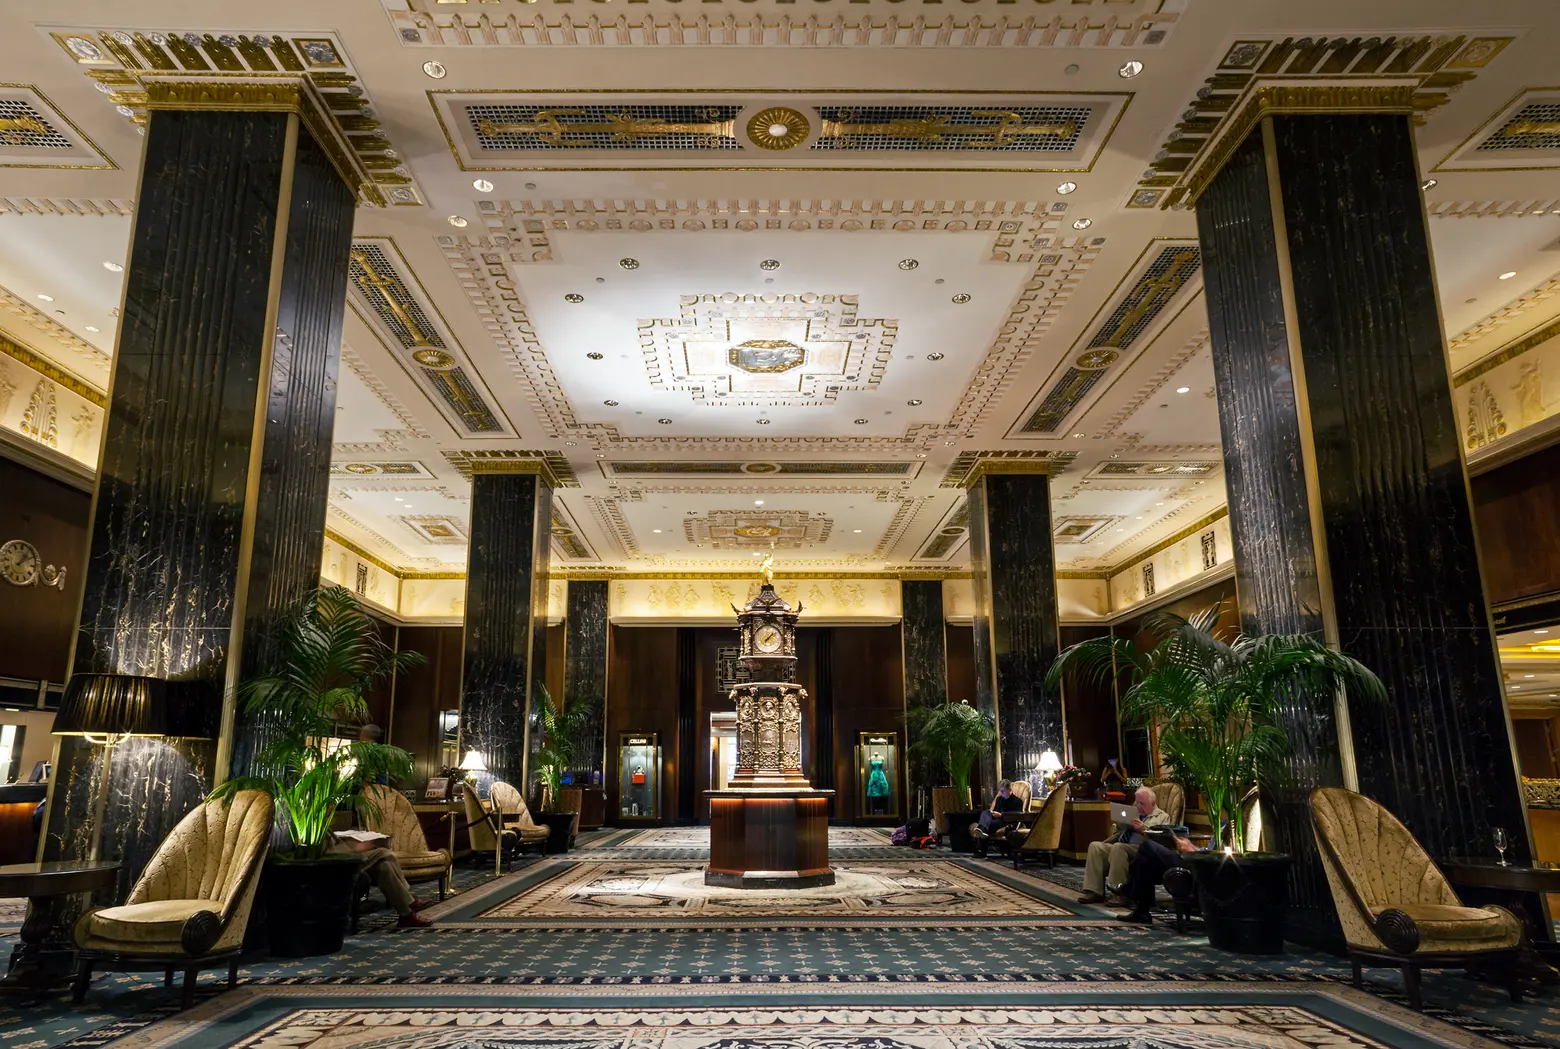 Photos capture the historic glamour of the Waldorf Astoria before its renovation